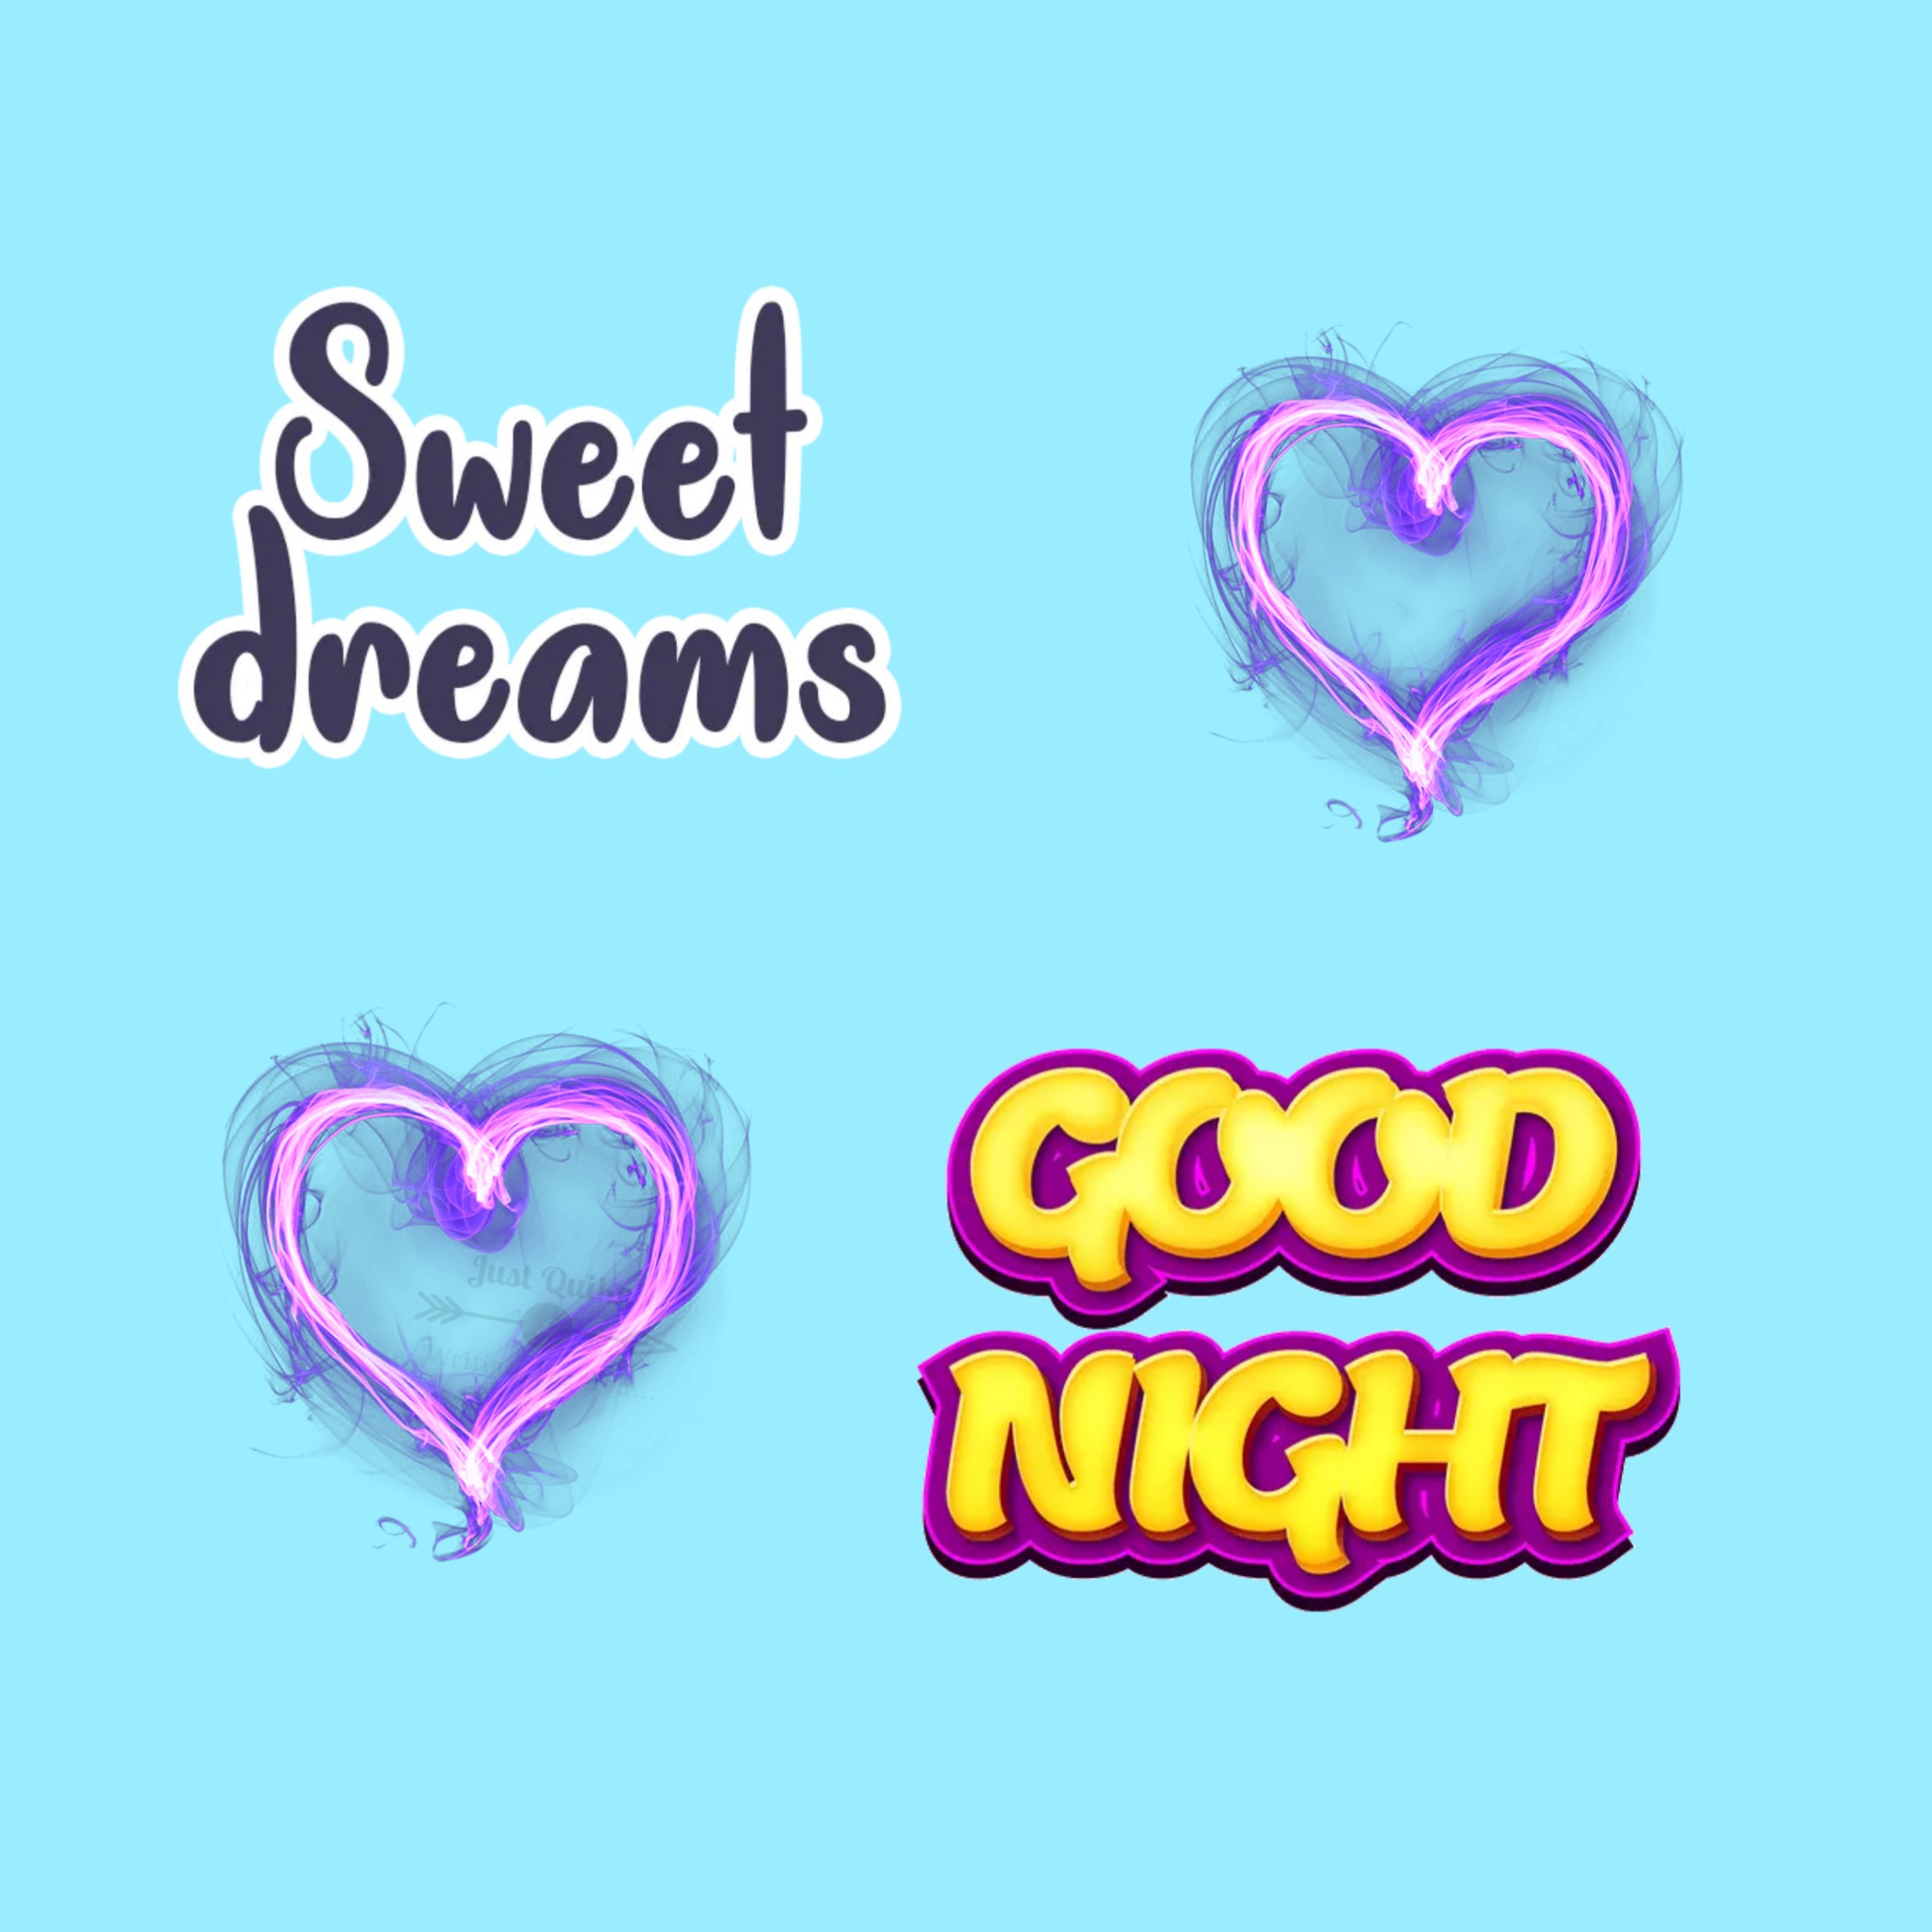 Good Night HD Pics Images For Relatives